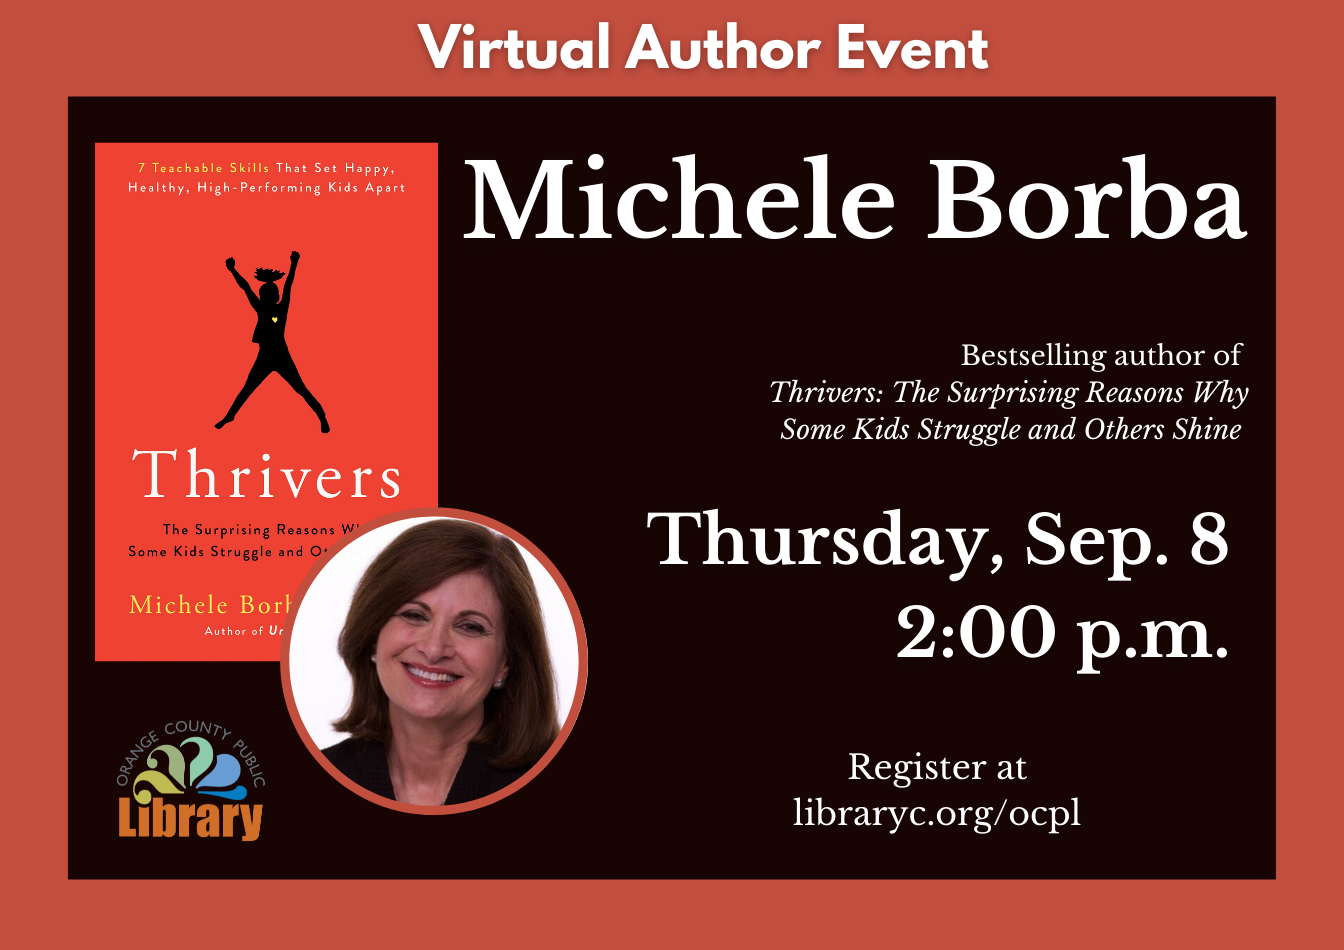 A widget advertising a virtual author event with Michele Borba.